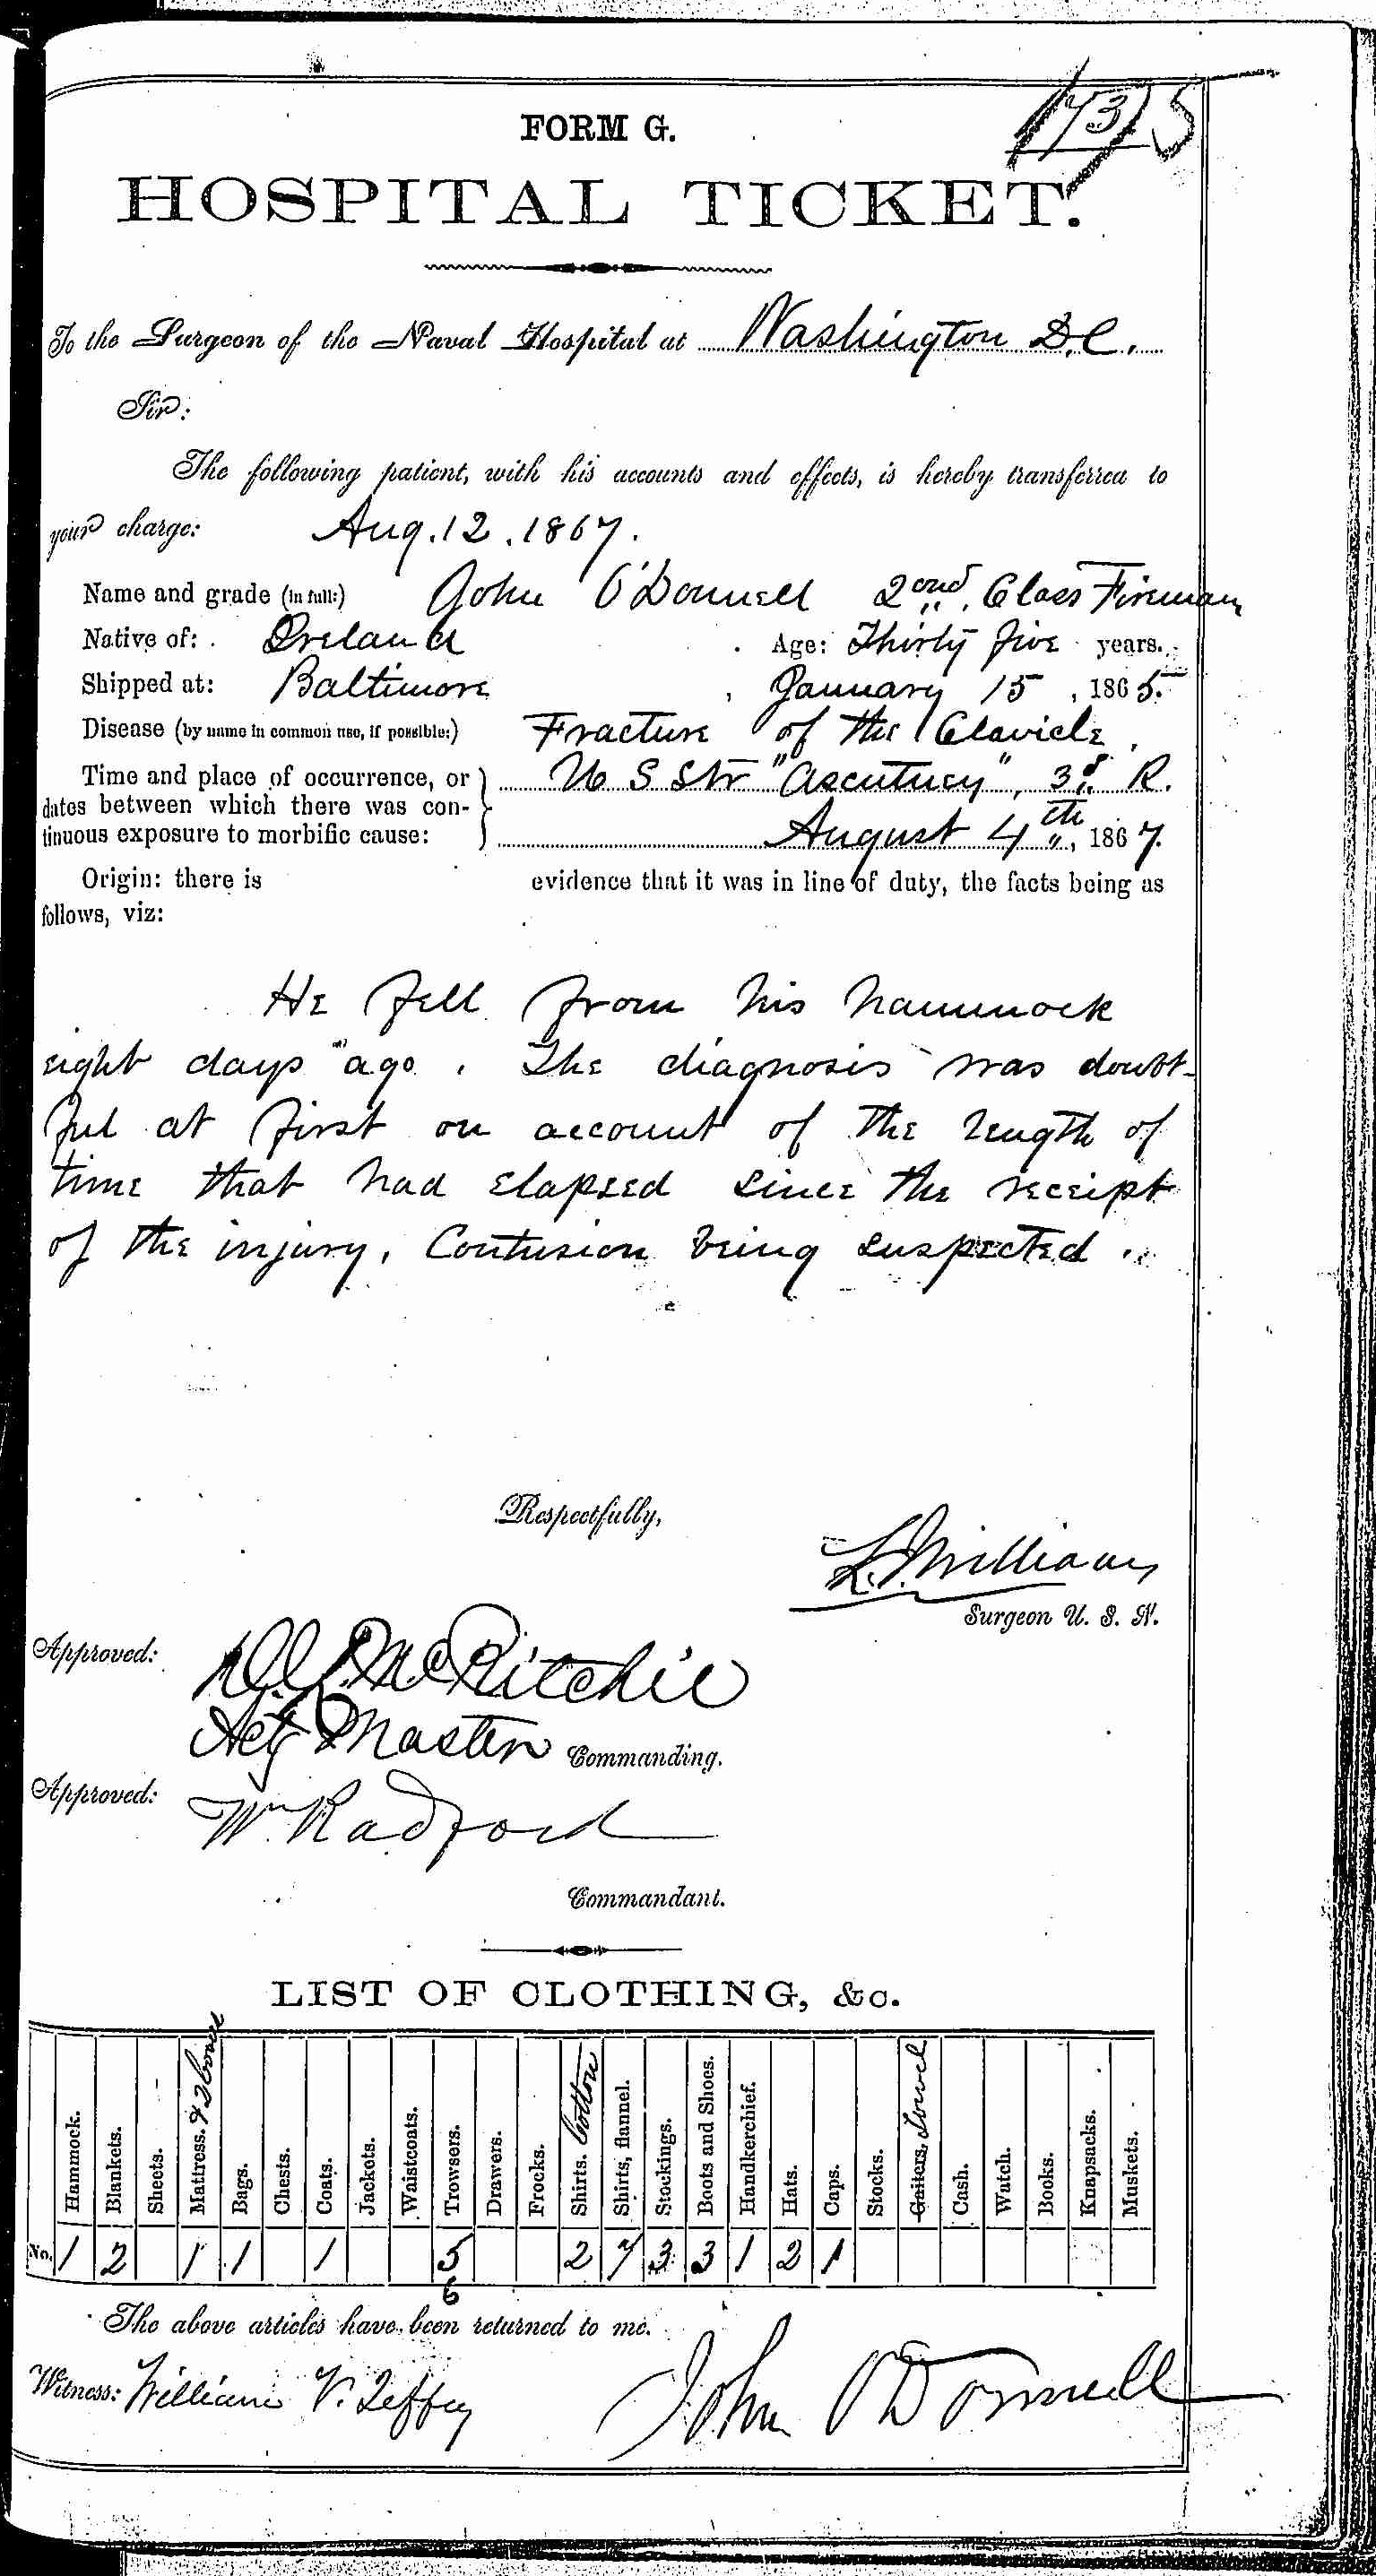 Entry for James O'Donnell (page 1 of 2) in the log Hospital Tickets and Case Papers - Naval Hospital - Washington, D.C. - 1866-68